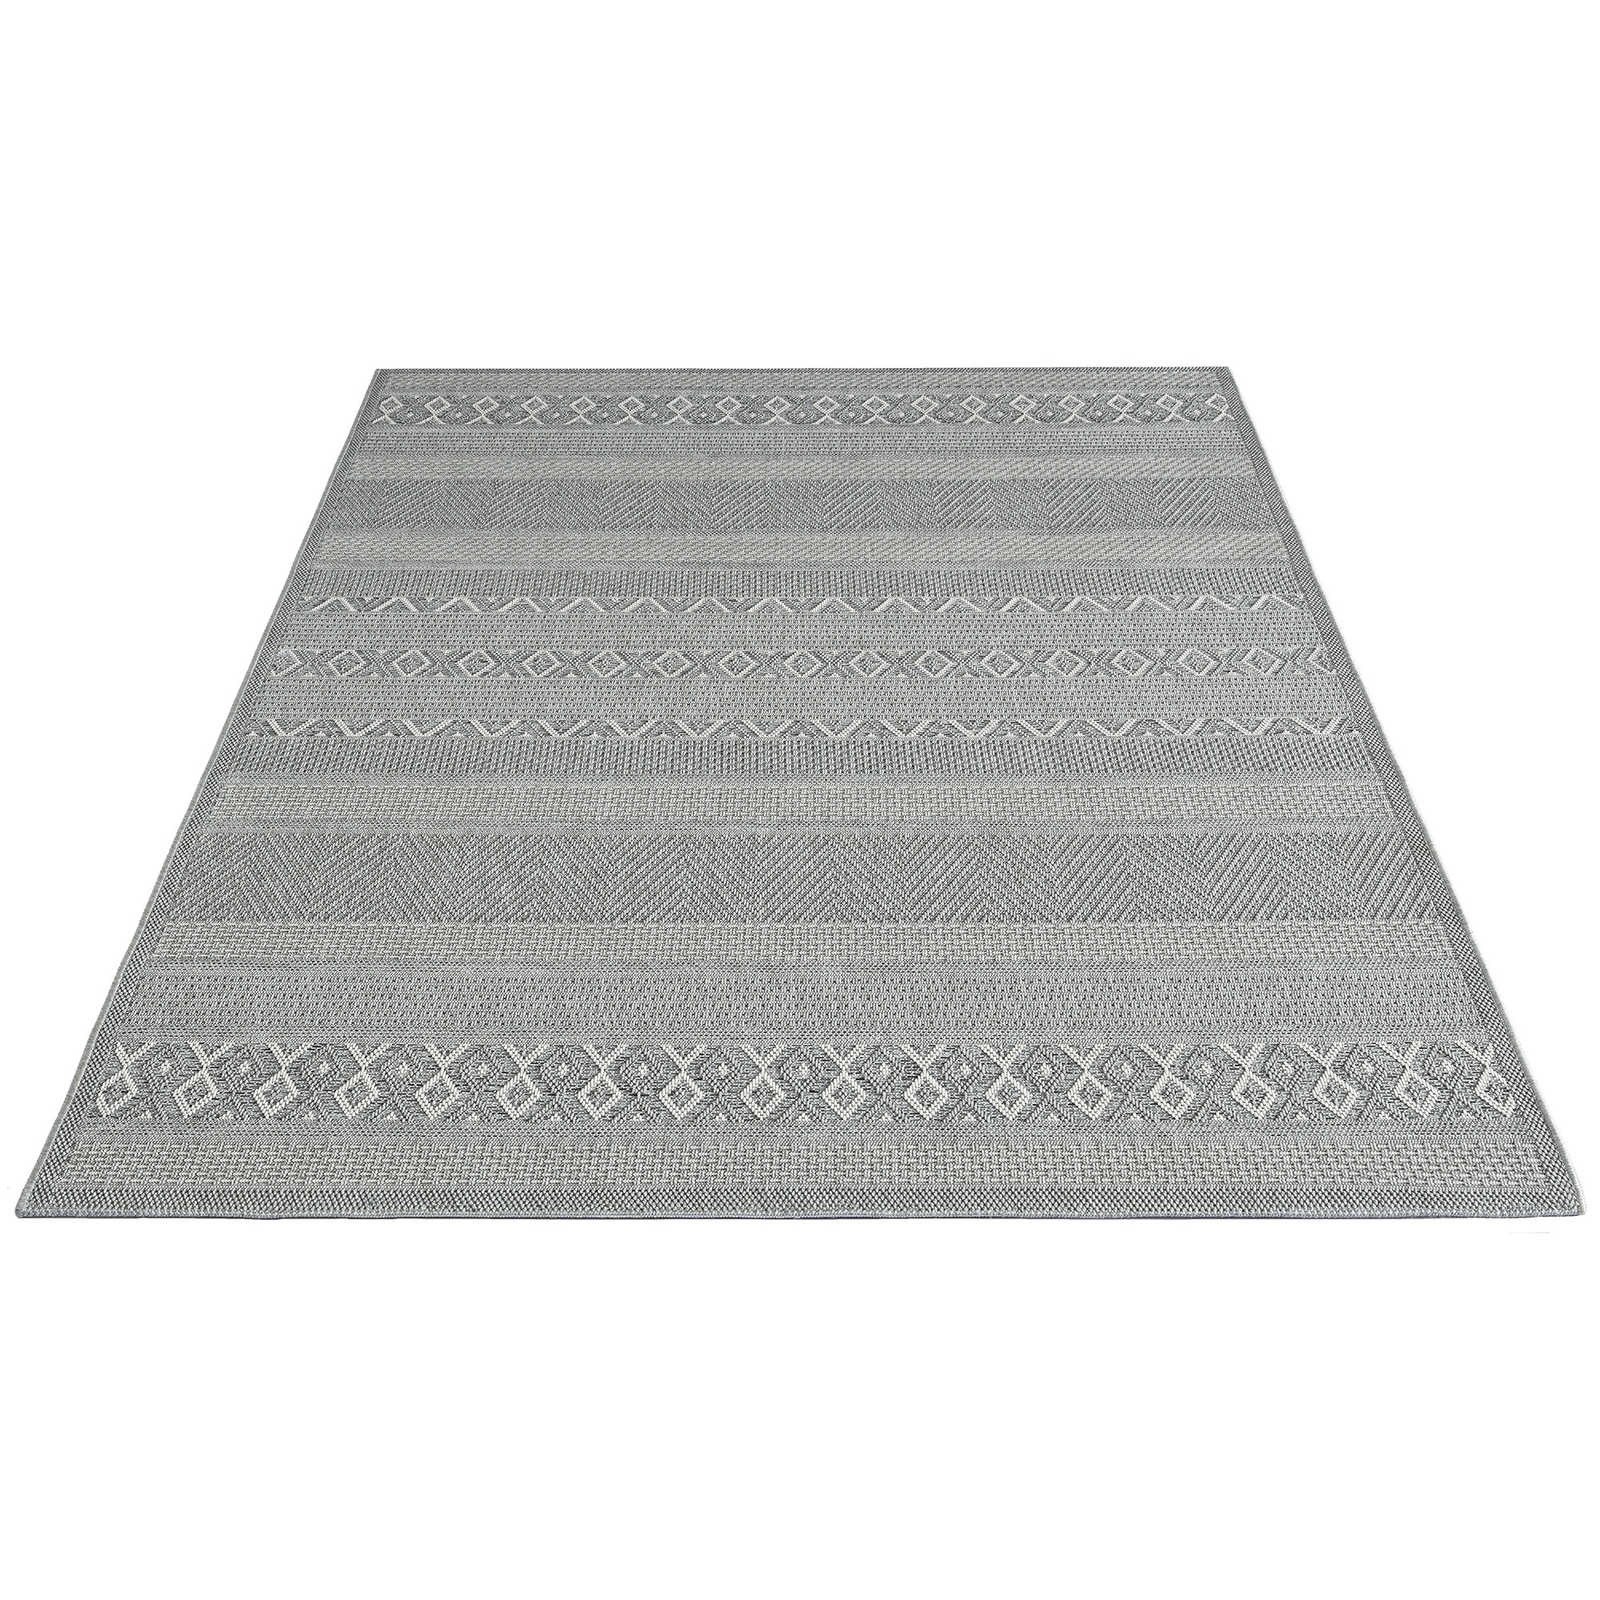 Simple Patterned Outdoor Rug in Grey - 280 x 200 cm
